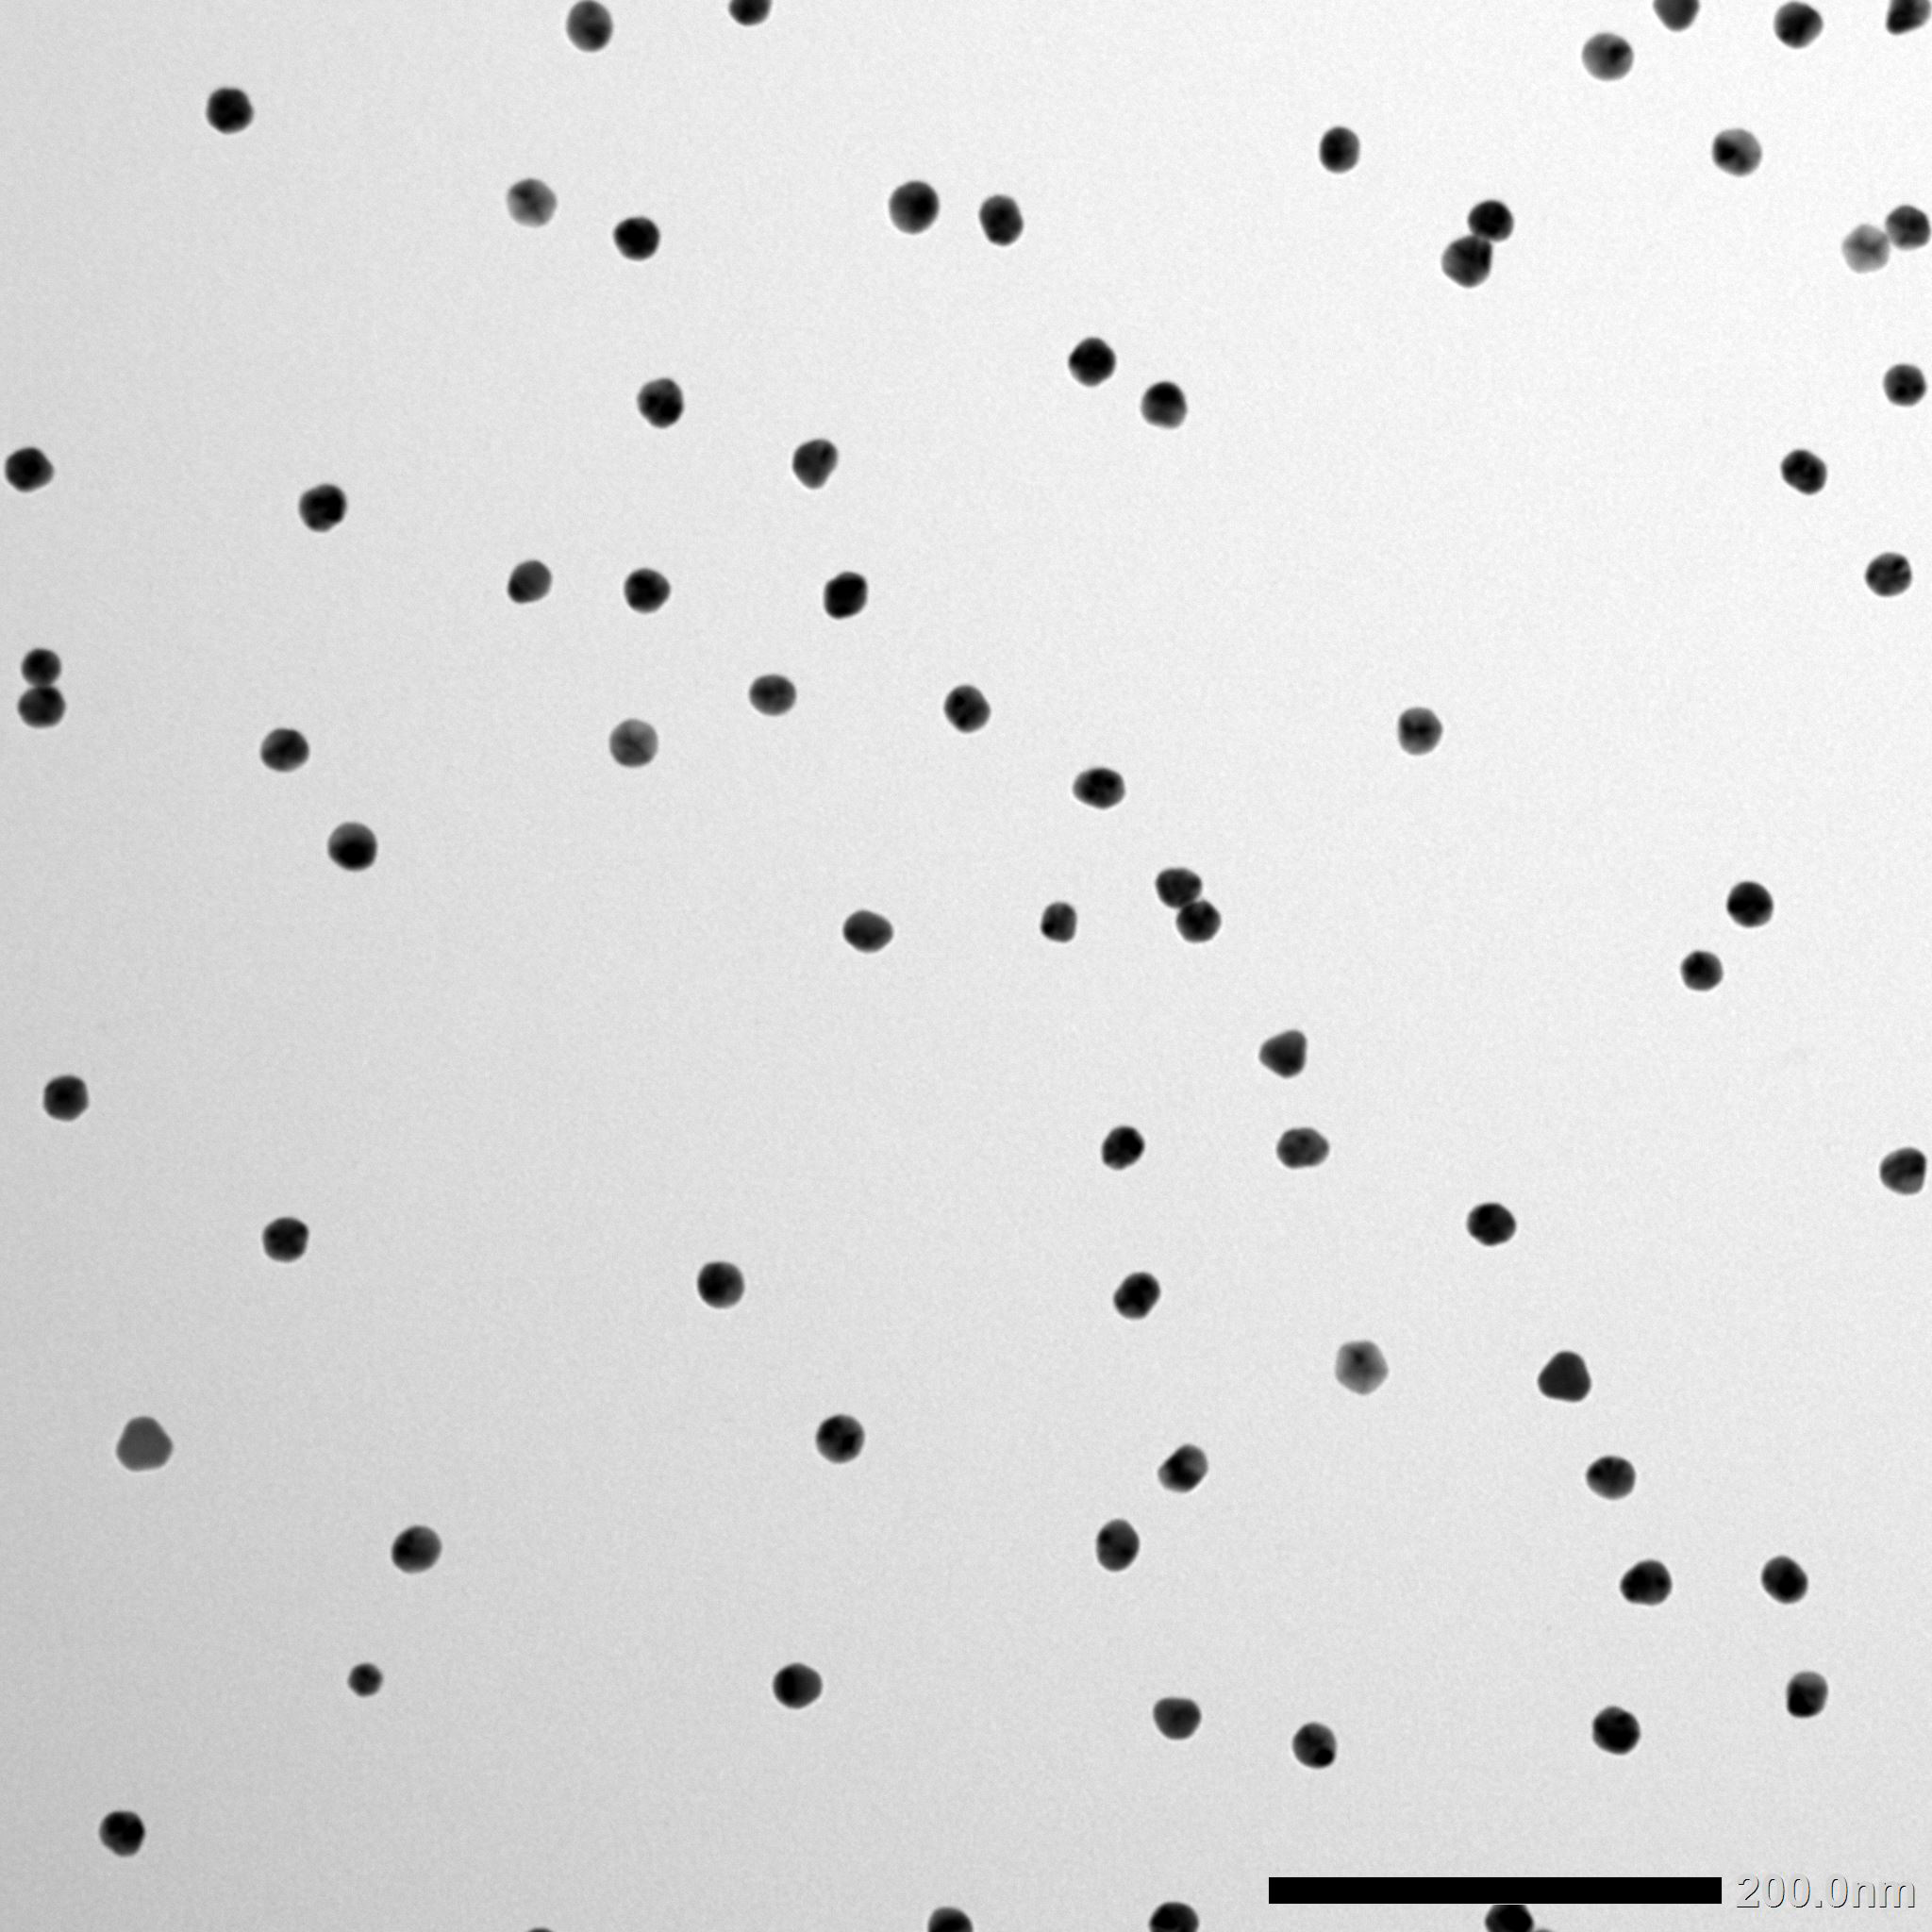 20nm Gold Nanoparticles